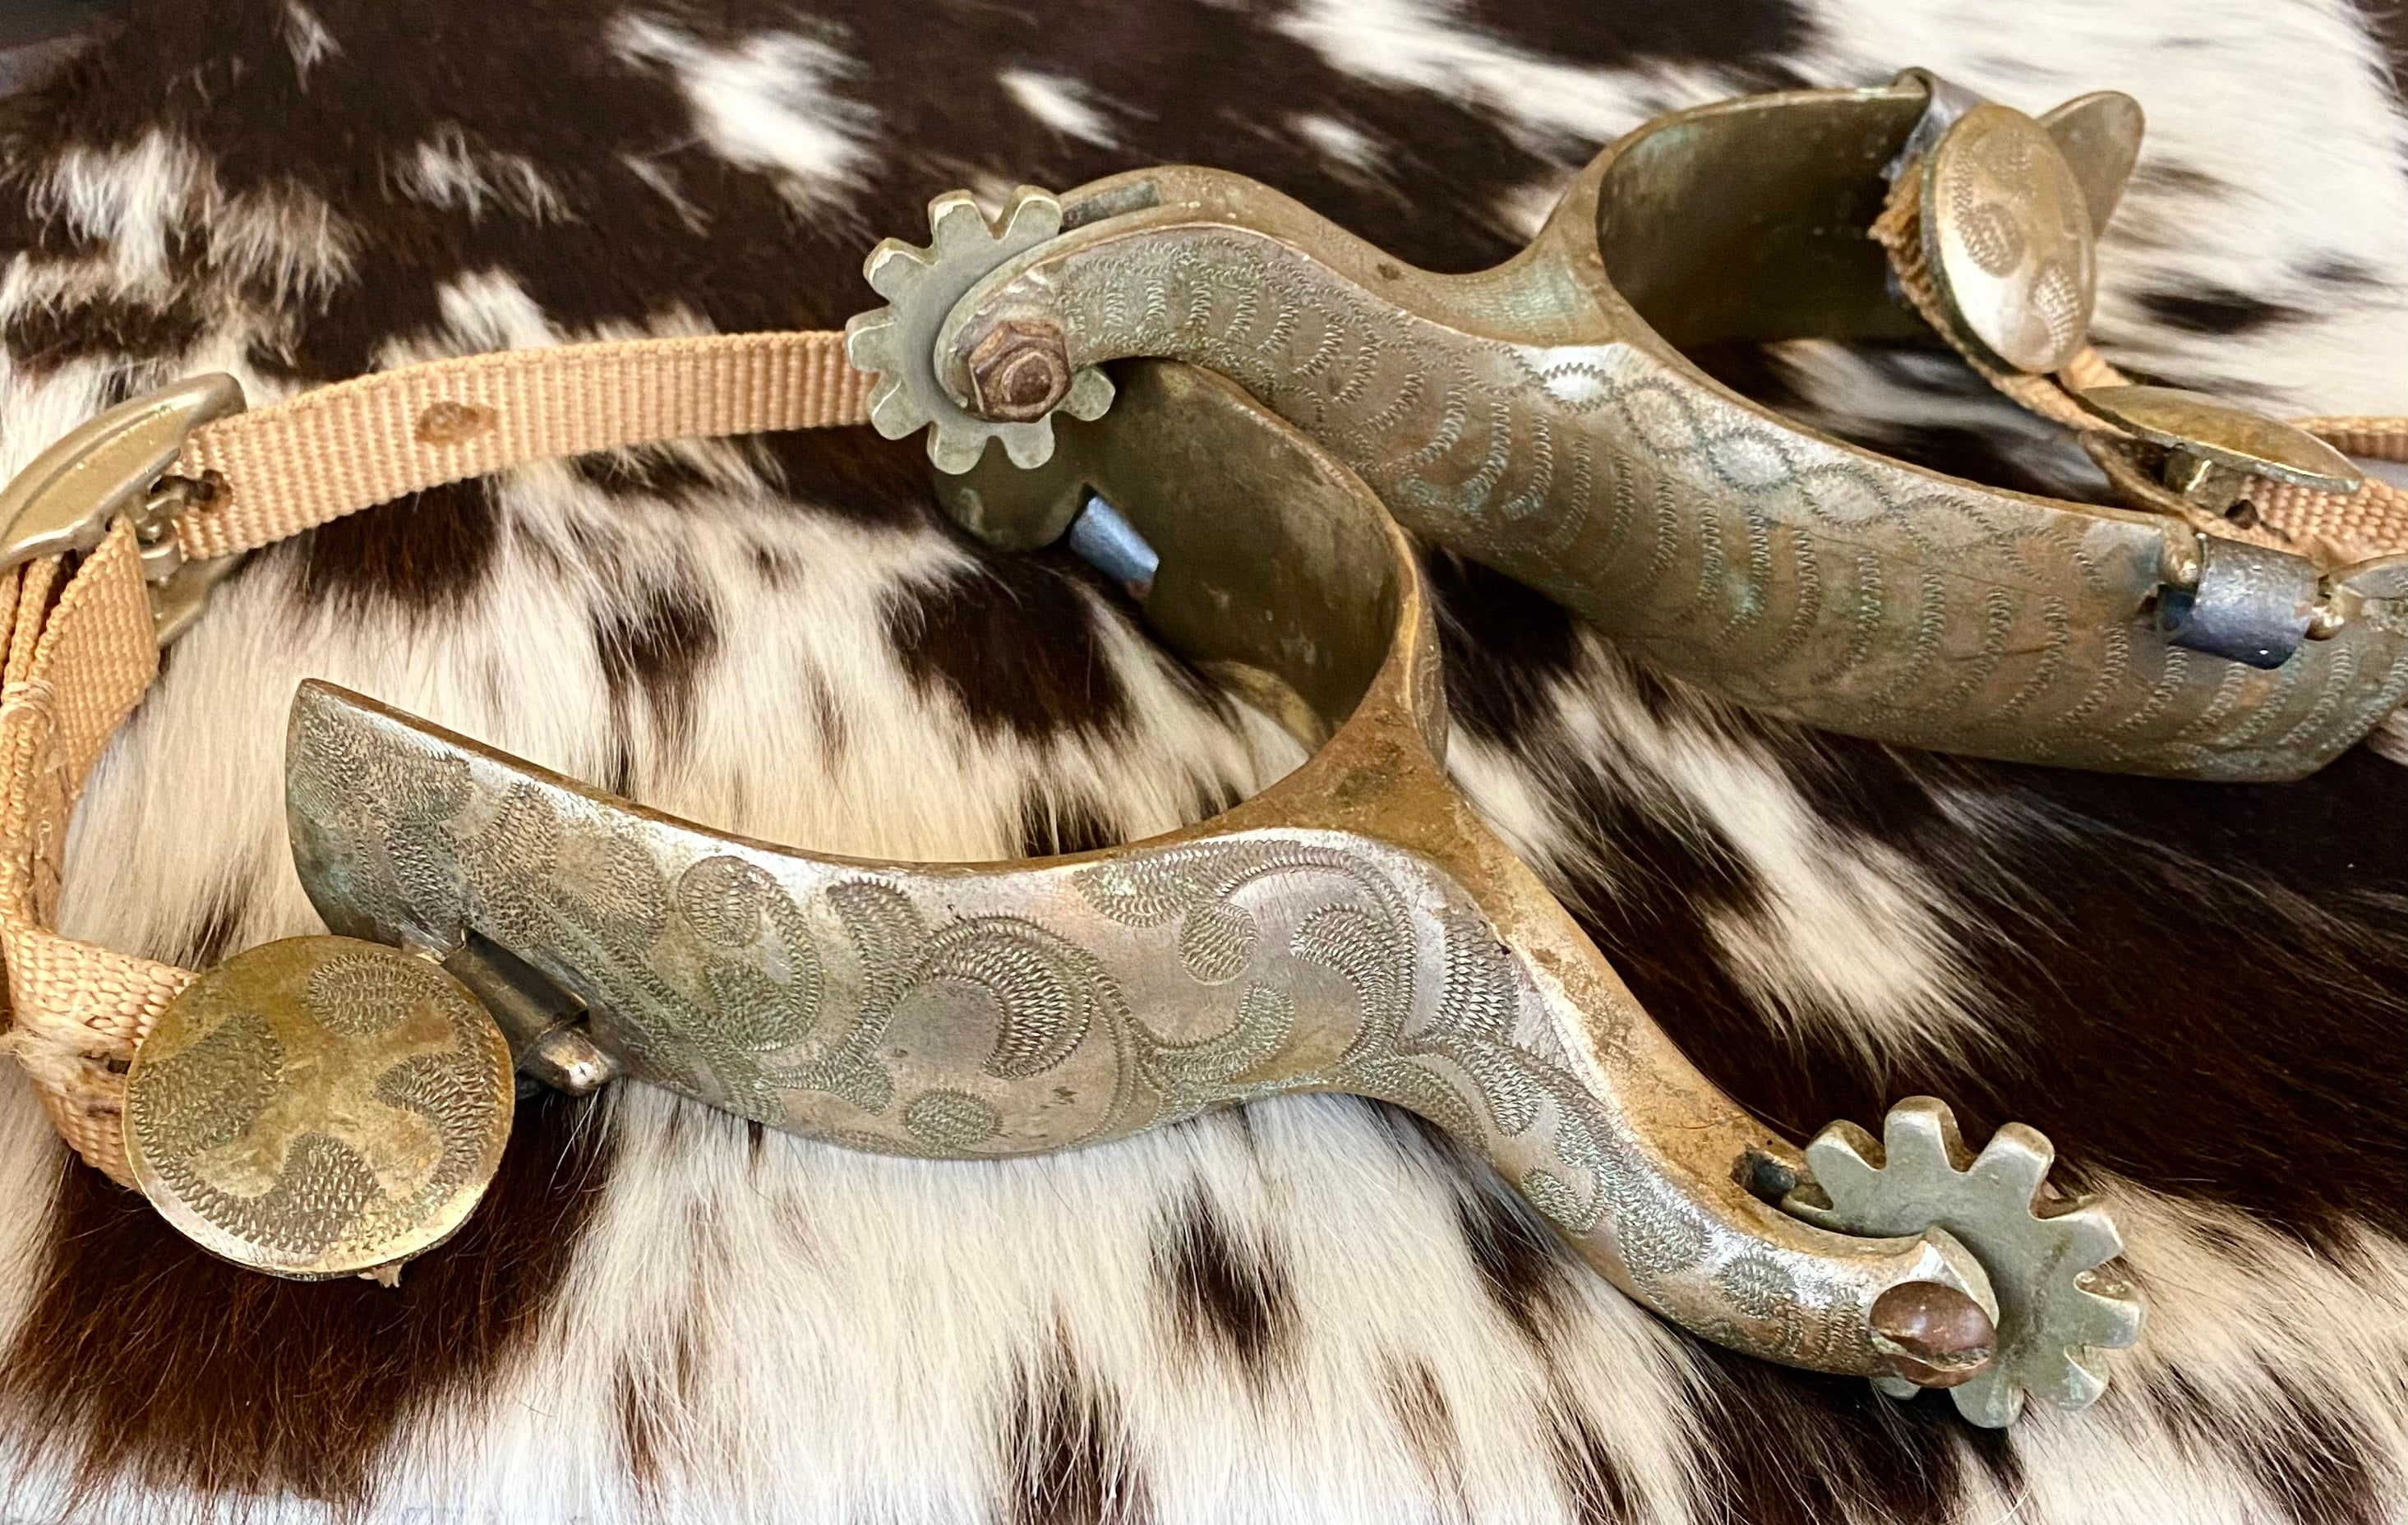 Antique Mexican Charro Spurs Amozoc Style, Distressed Inlaid Silver and  Tooled Leather Straps